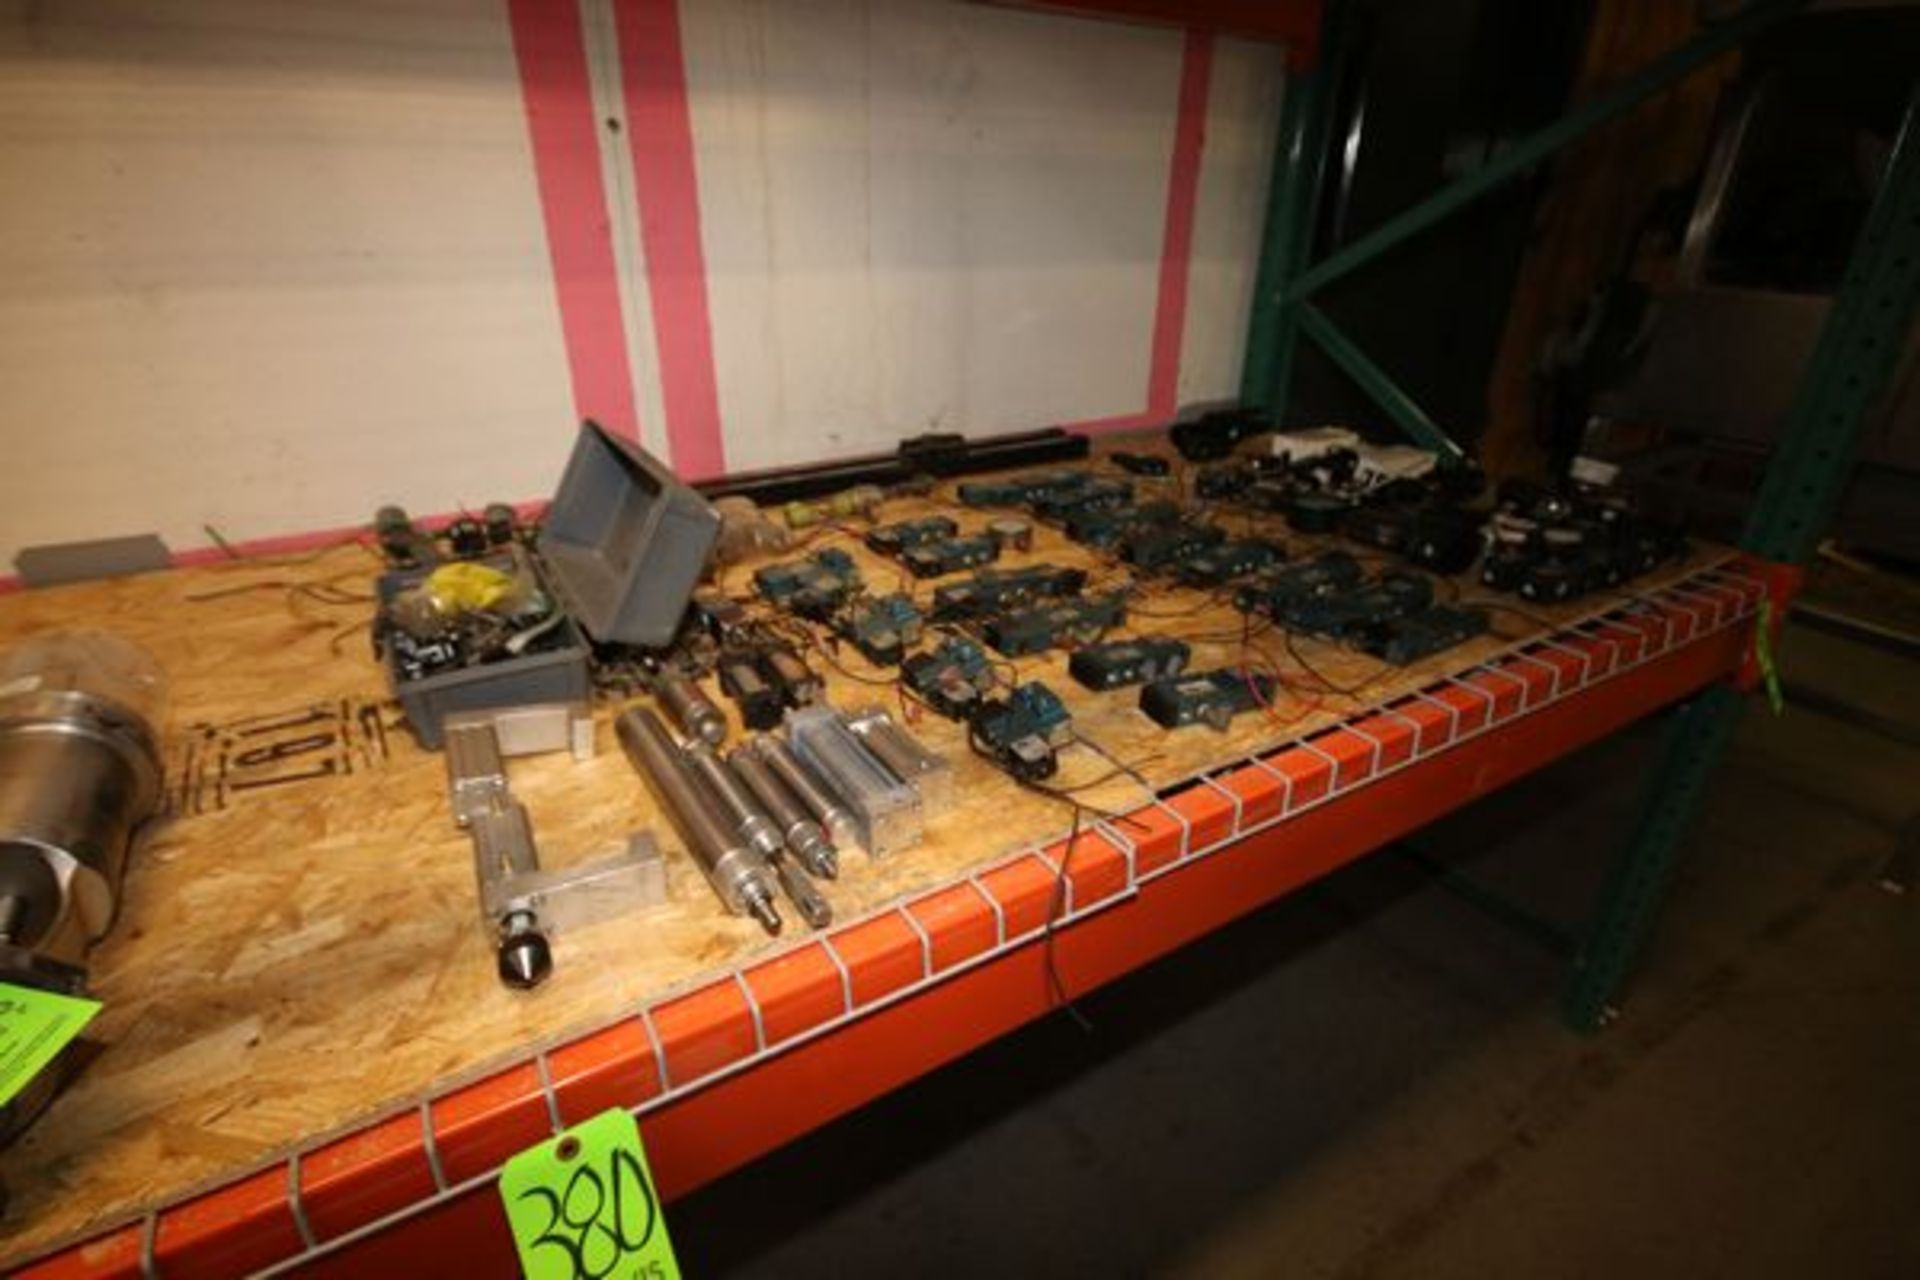 Lot of Assorted Pneumatic Parts, Including Cylinders, Gauges, and Other Parts - Image 2 of 2